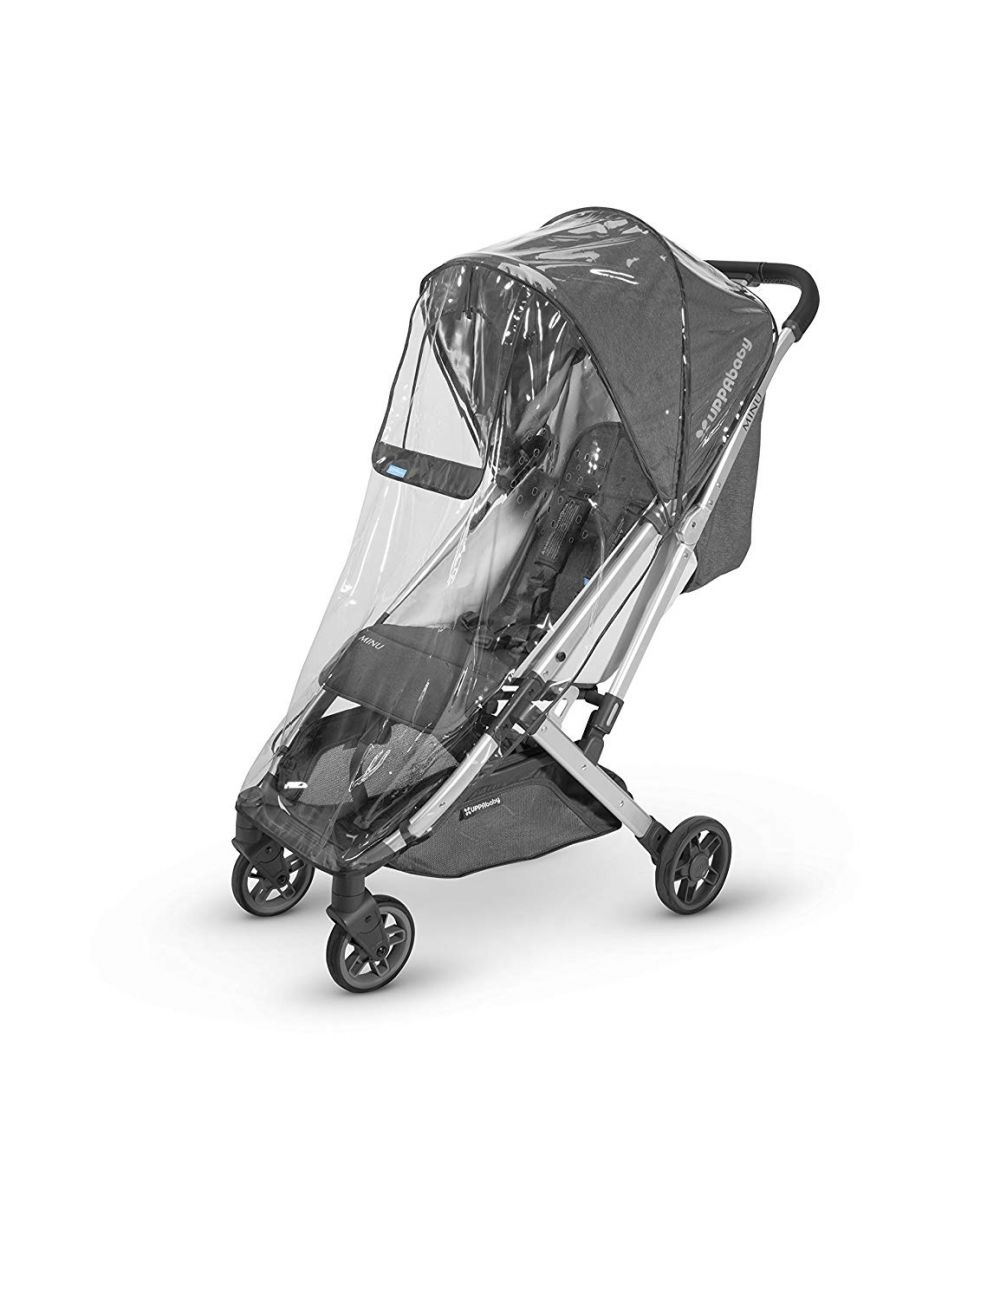 Uppababy Minu rain cover (does not include the Minu pushchair)